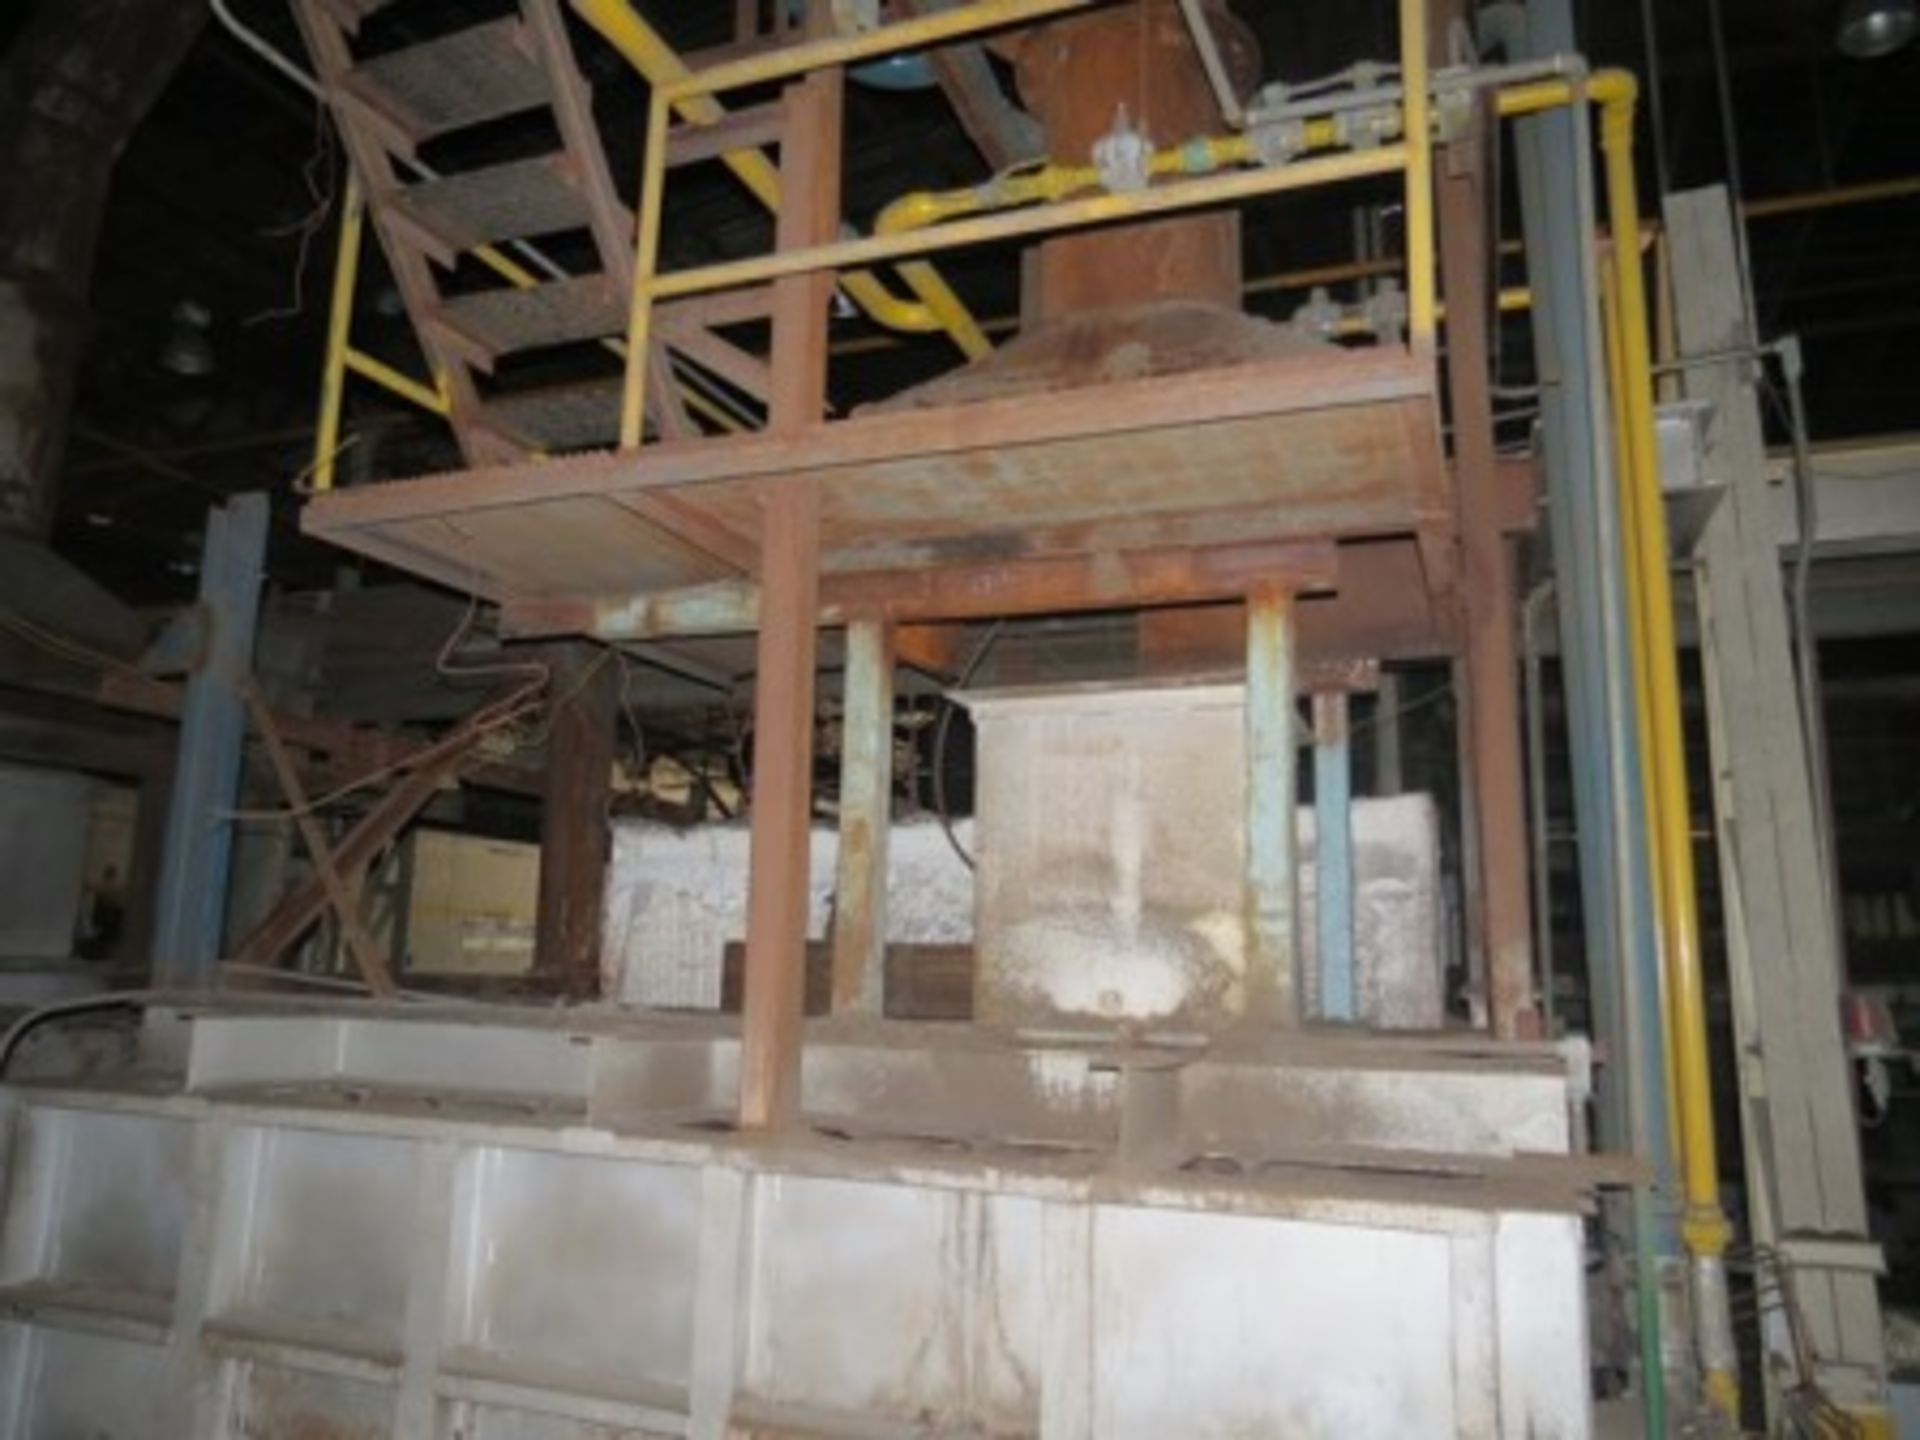 Melting furnace with dumper, hood and ductwork for gas extraction. - Image 5 of 12